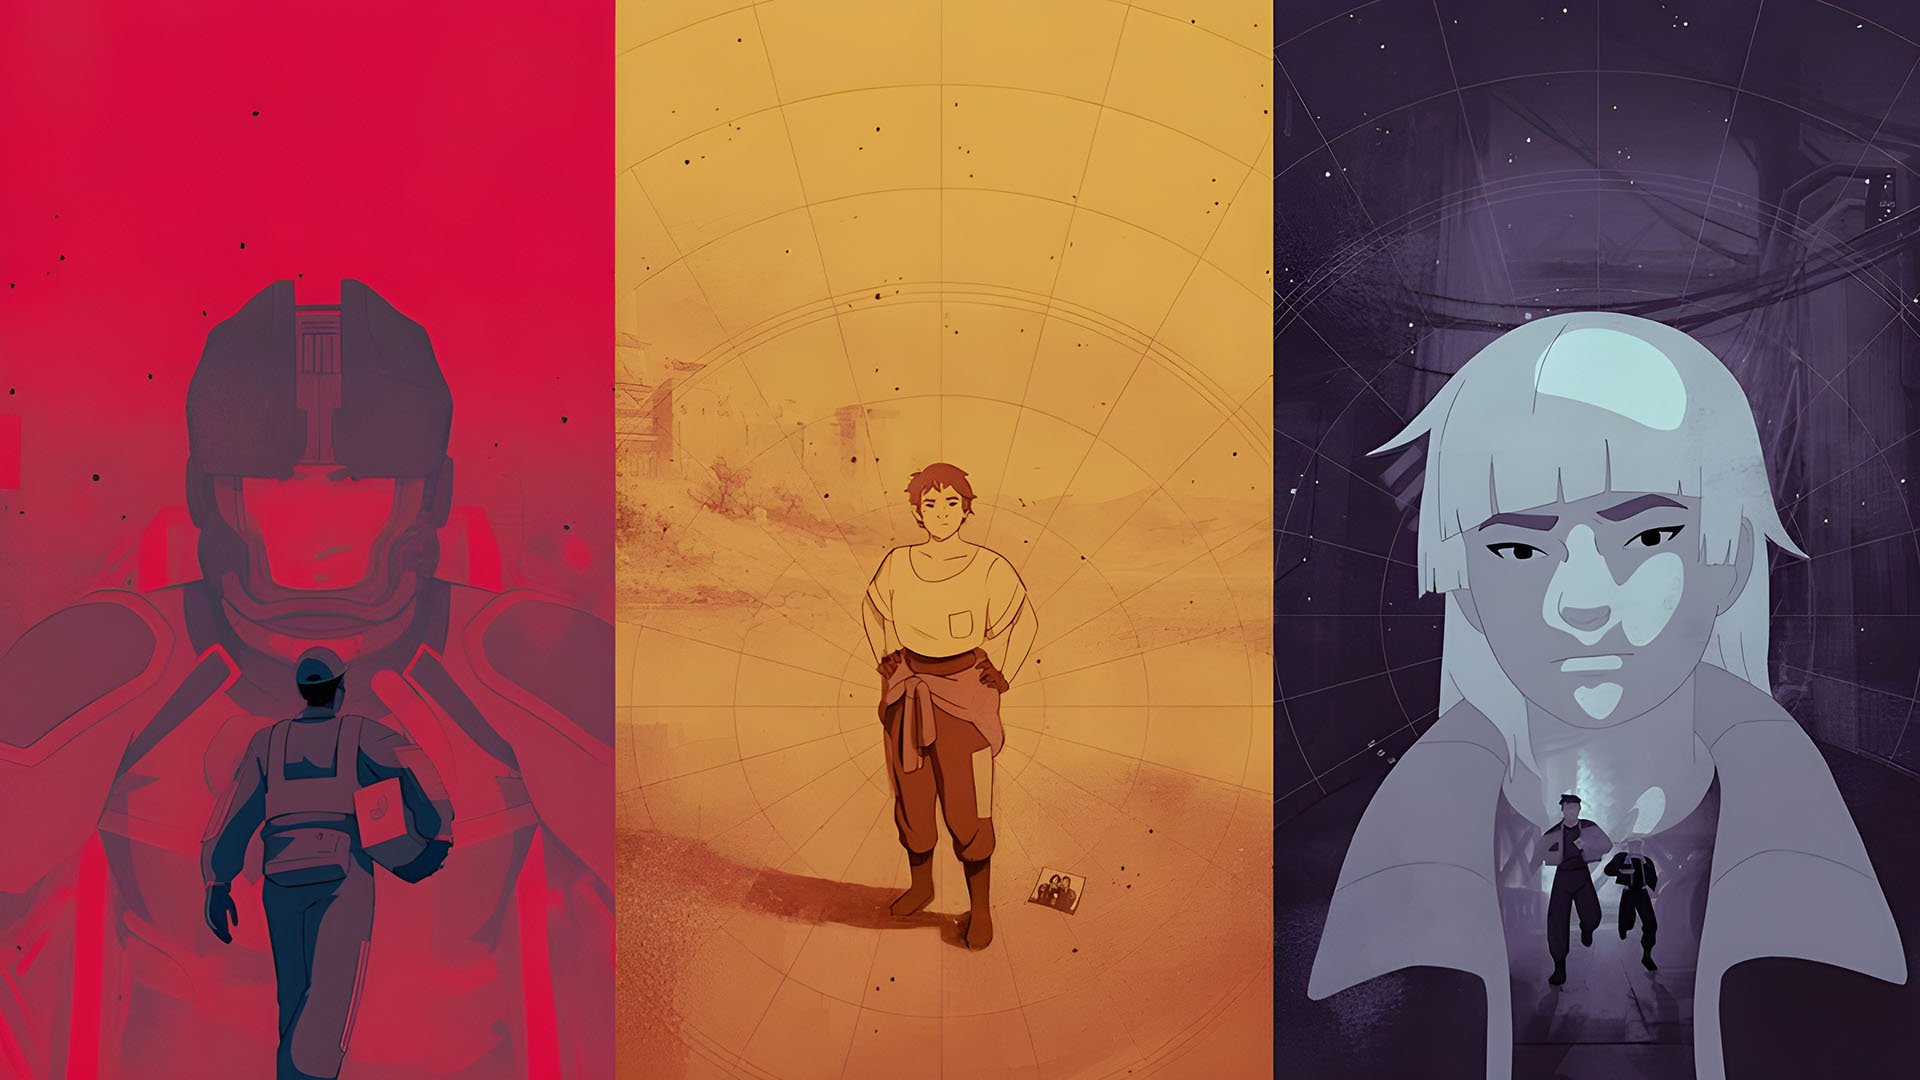 Starfield Animated Trailers Highlight Unique Stories Across the Universe